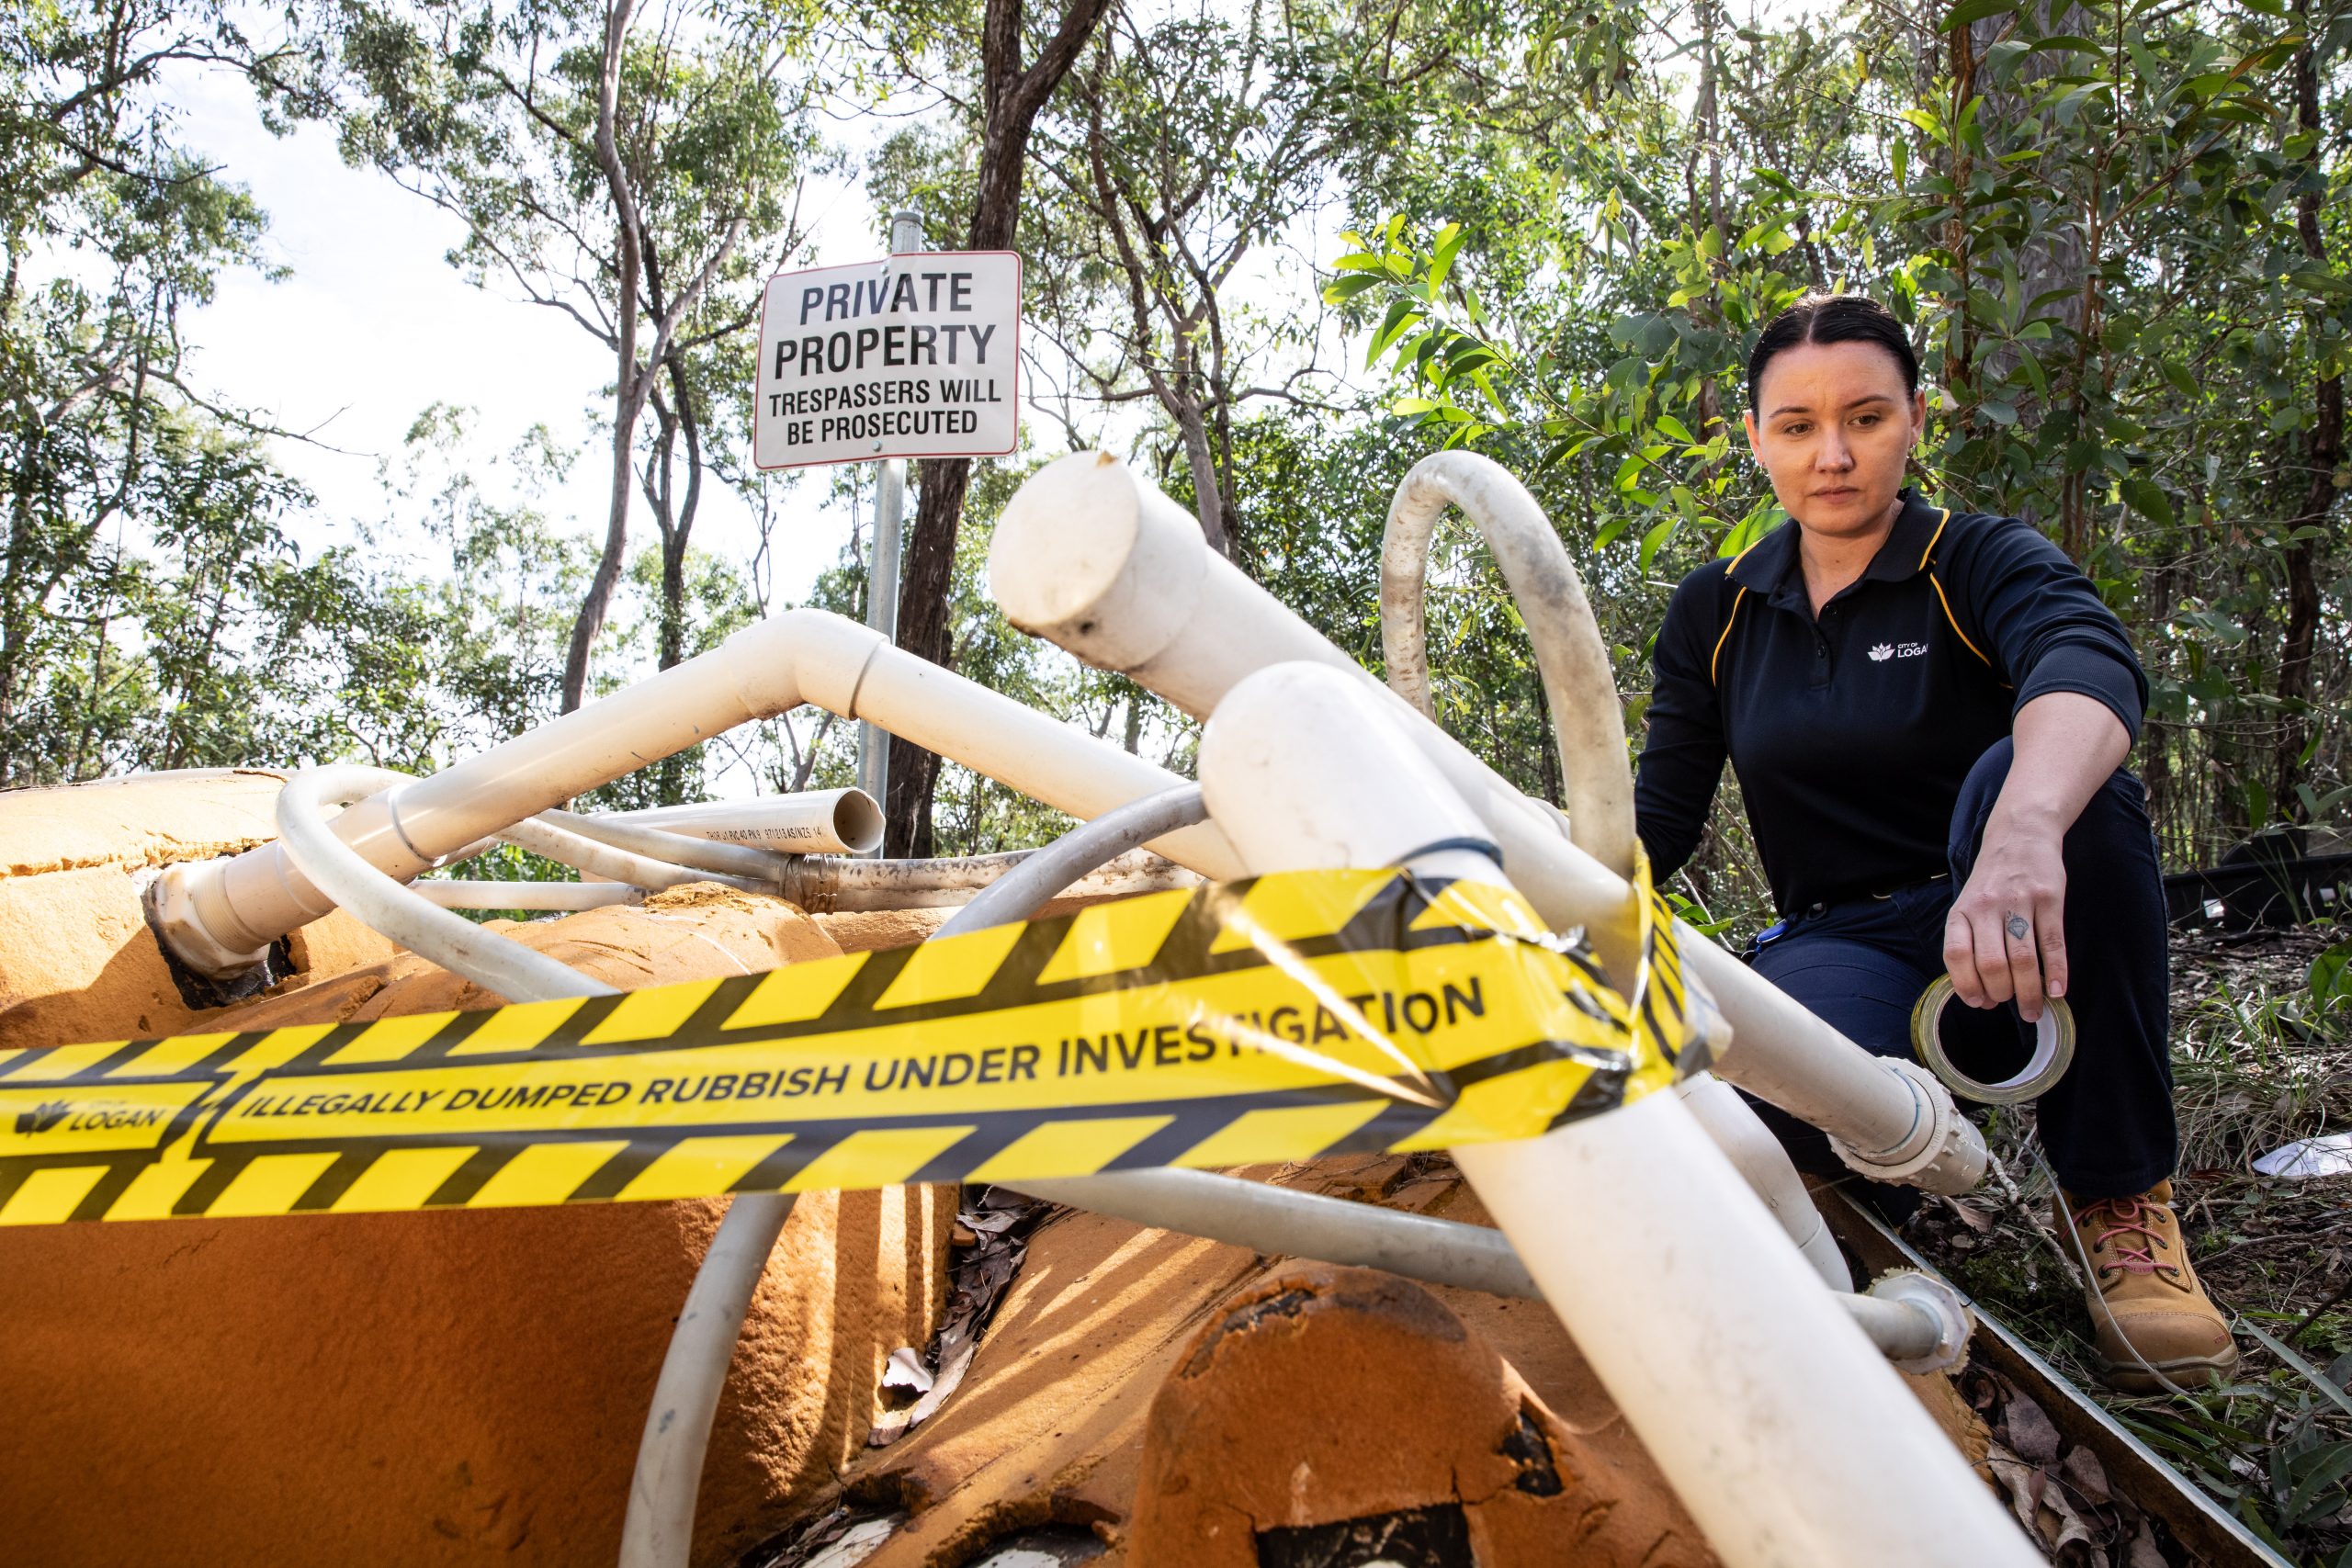 Illegal dumping spoils our streets, parks and bushland